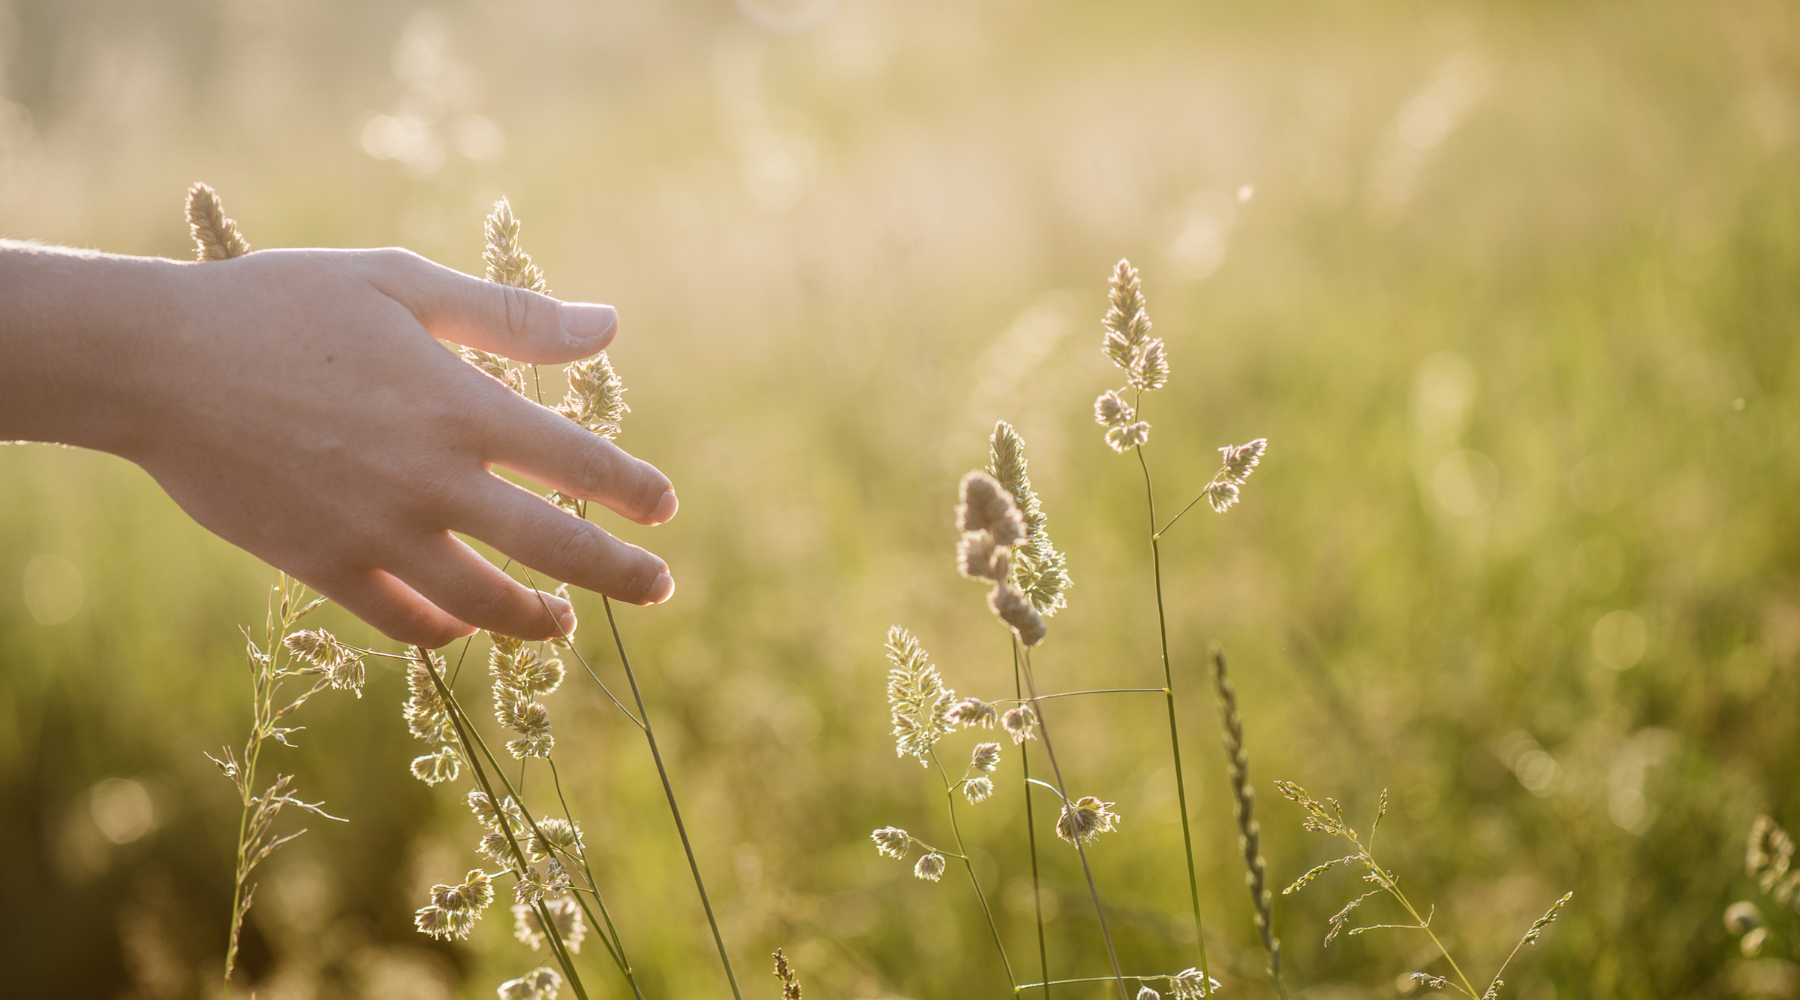 A hand touching tall grass in the sunlight.